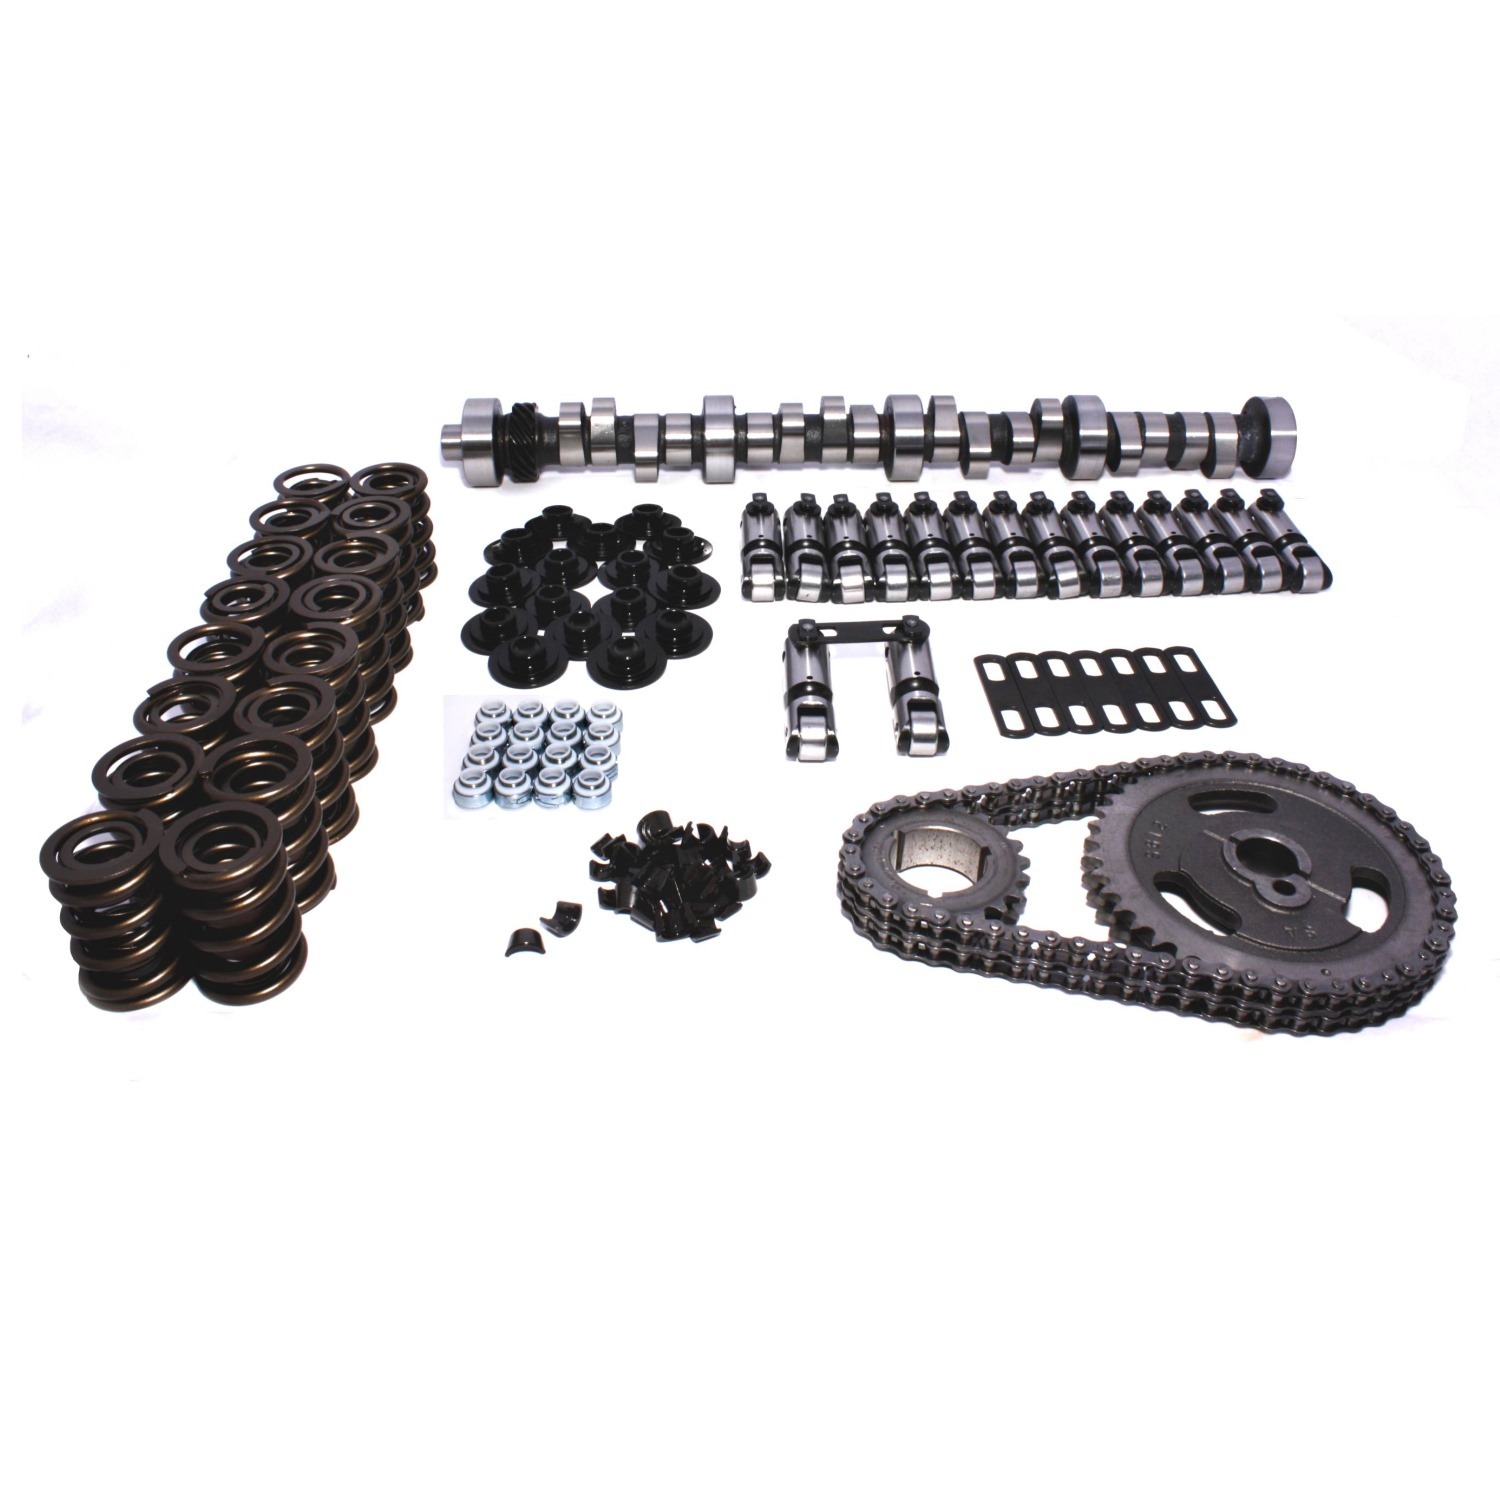 K35-769-8 Xtreme Energy 230/236 Solid Roller Cam K-Kit for Ford 351W COMP  CAMS